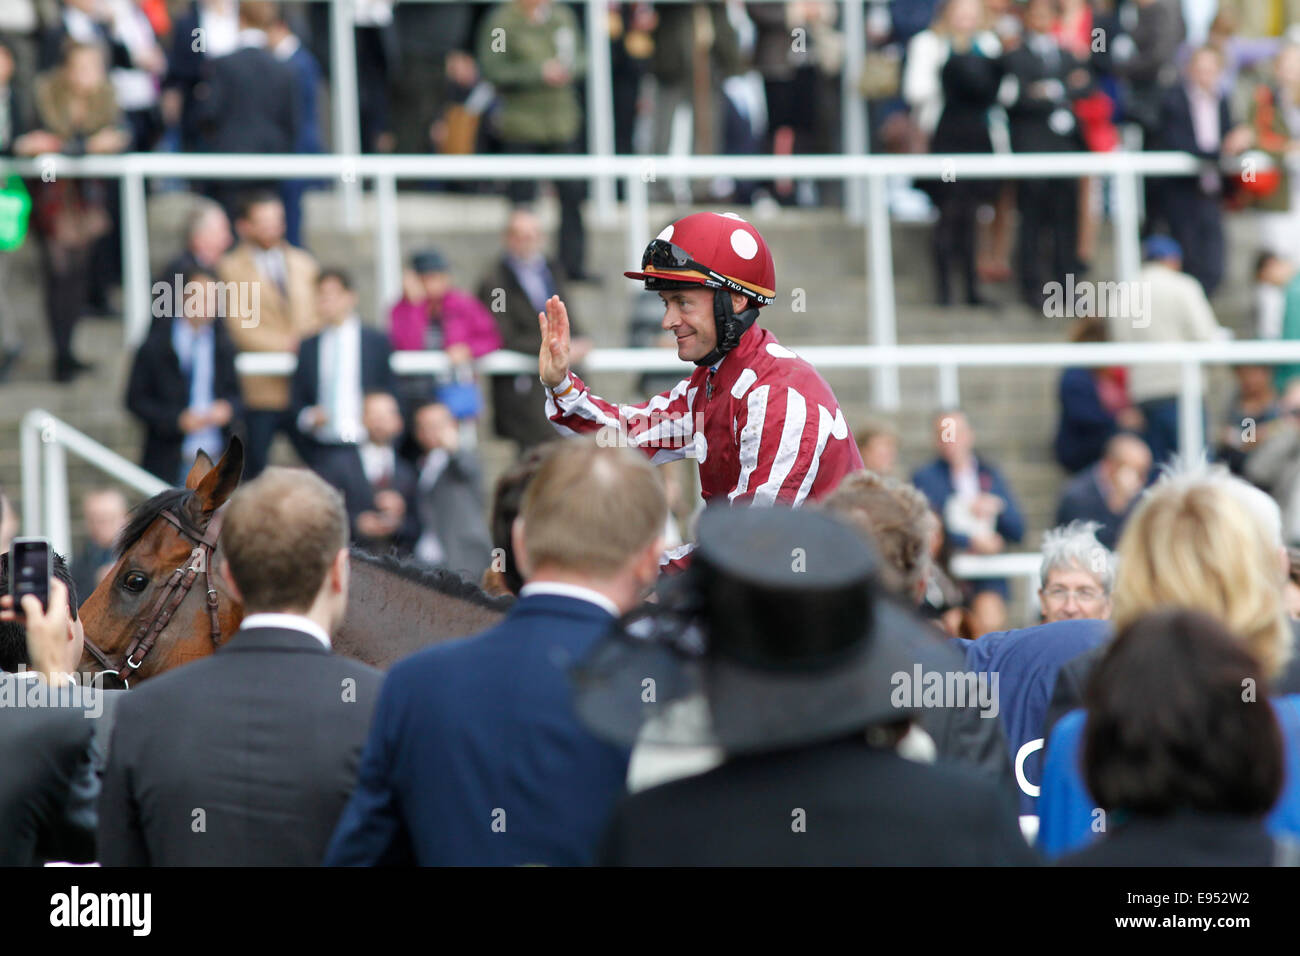 18.10.2014 - Ascot; Winners presentation with Charm Spirit, ridden by Olivier Peslier after winning the Qipco British Champions Fillies and Mares Stakes (Group 1). Olivier Peslier salutes the crowd. Credit: Lajos-Eric Balogh/turfstock.com Stock Photo